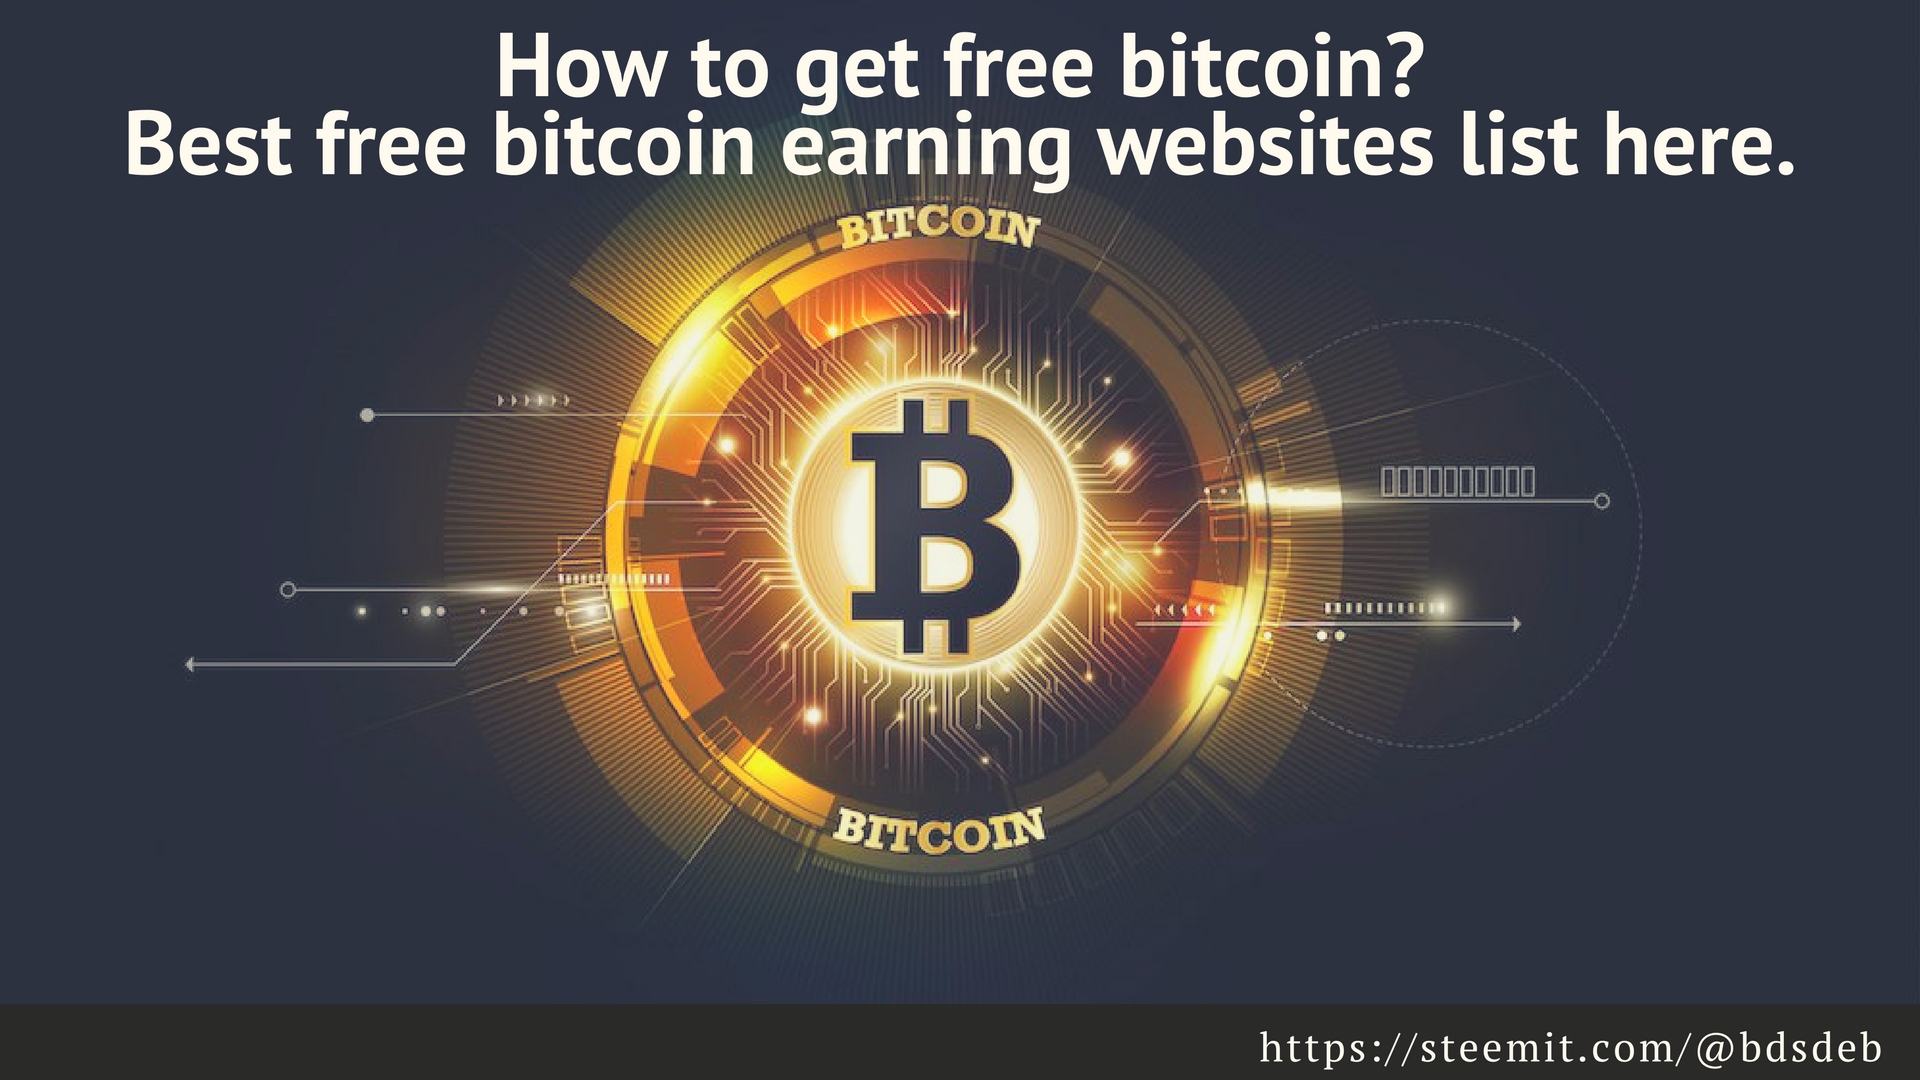 Sites to get free bitcoin